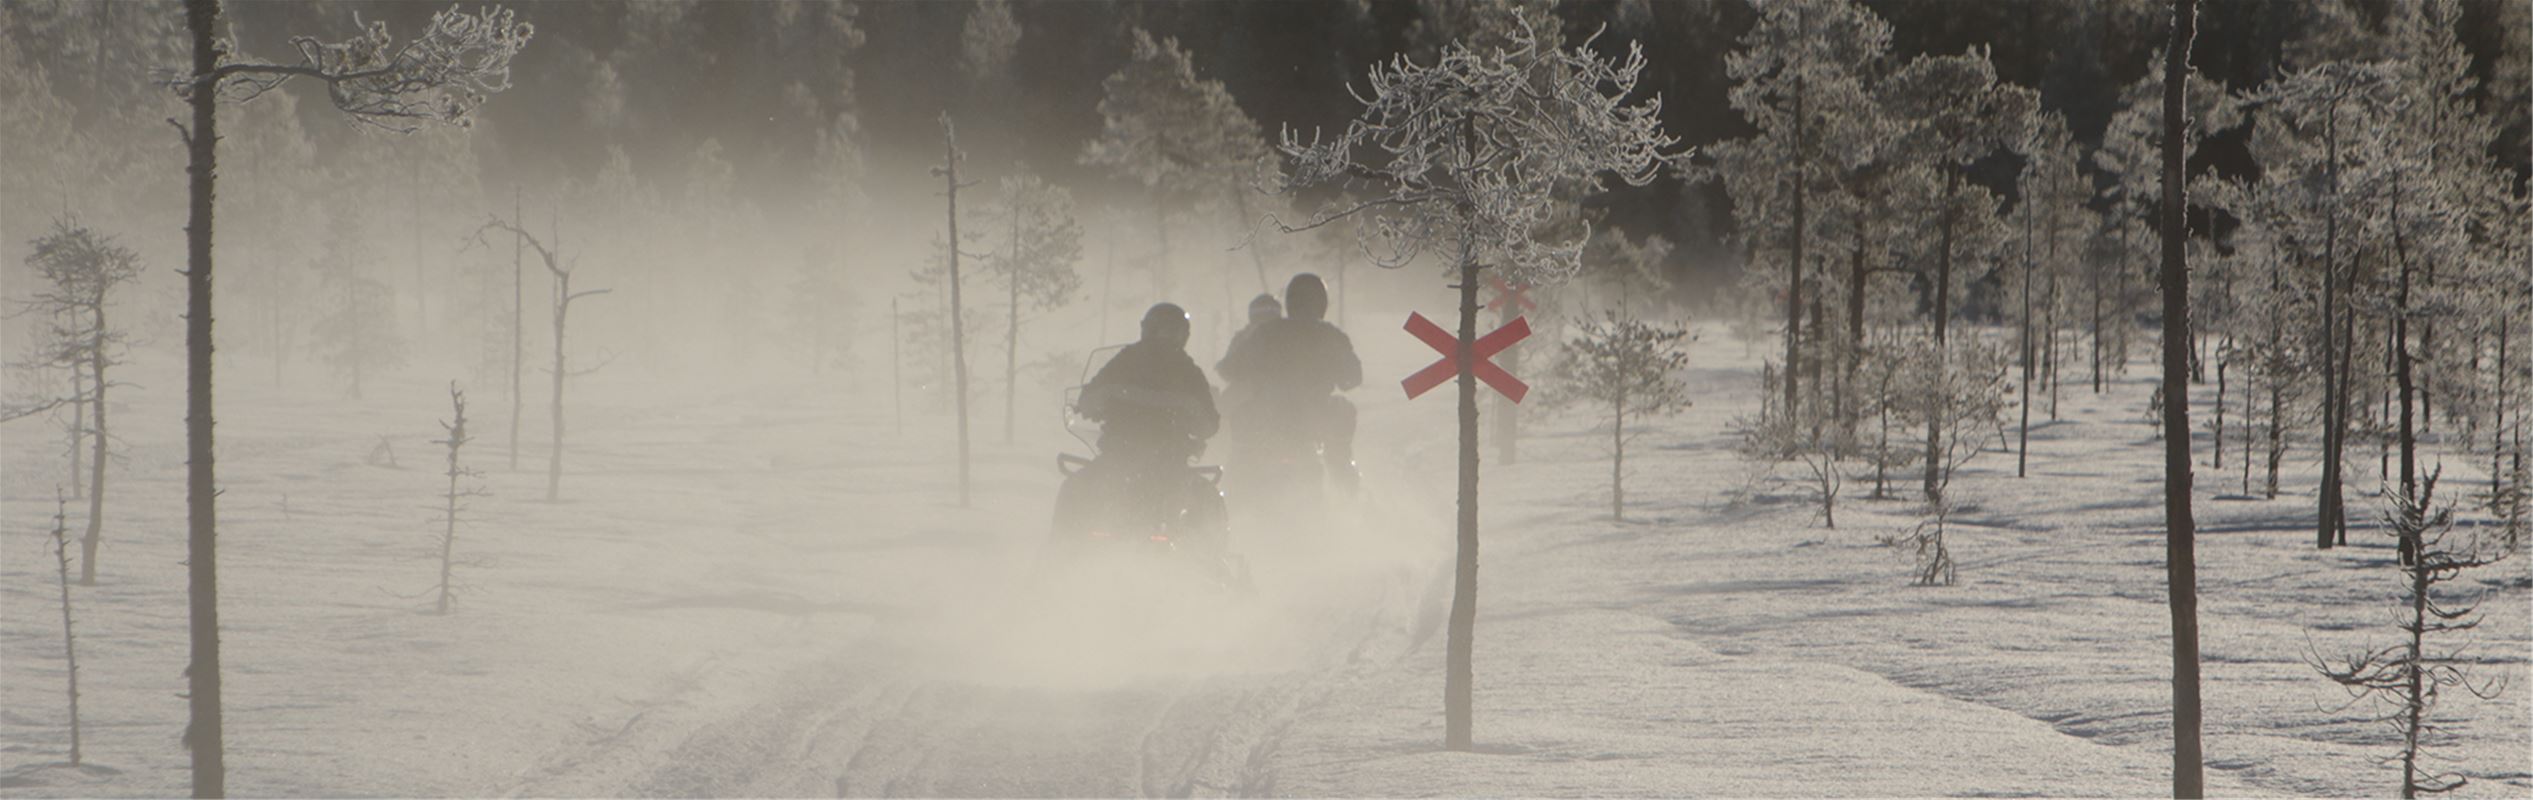 Snowmobiles running through the forest.